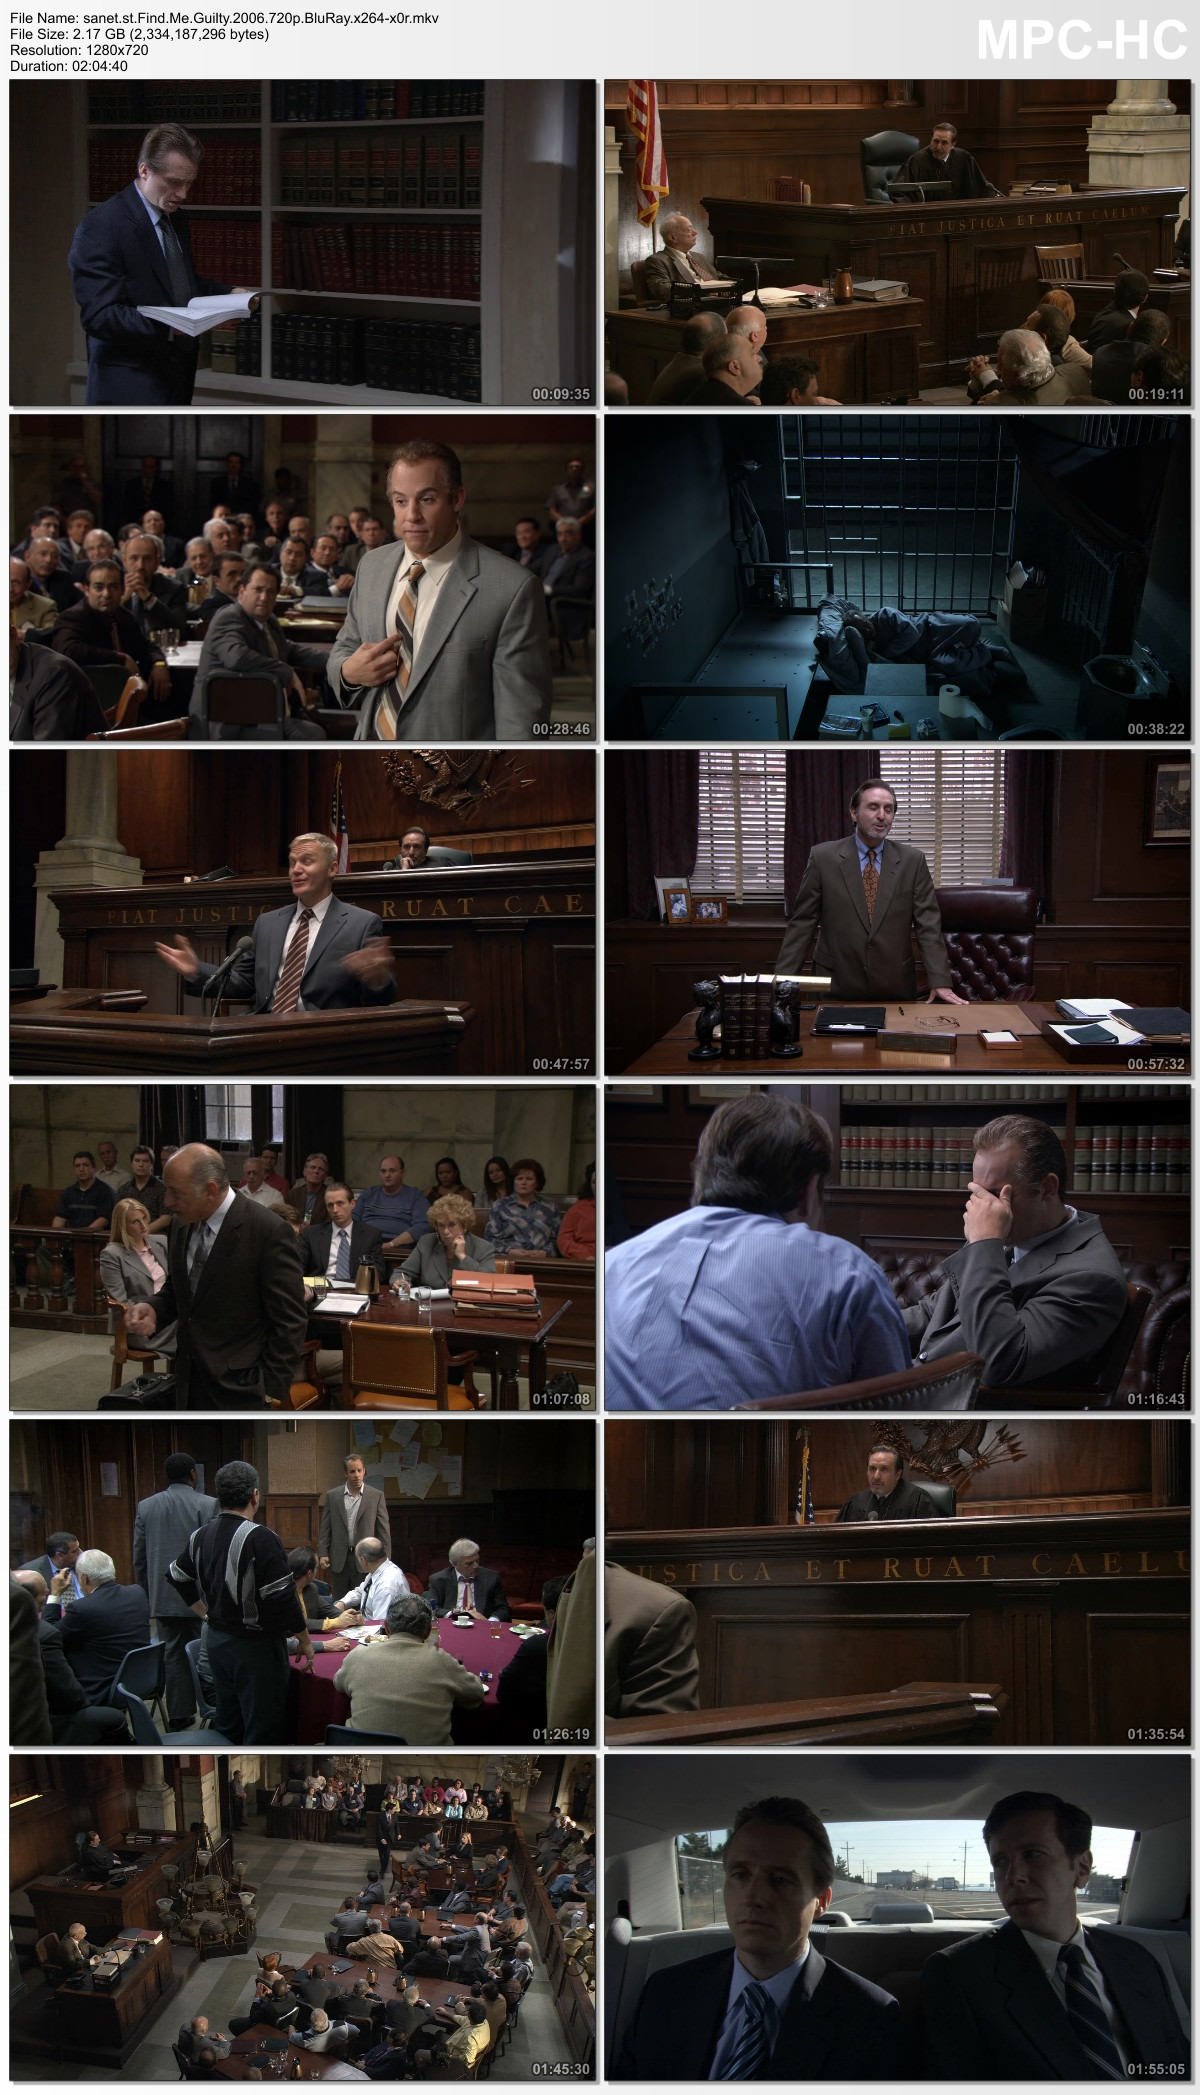 2006 Find Me Guilty